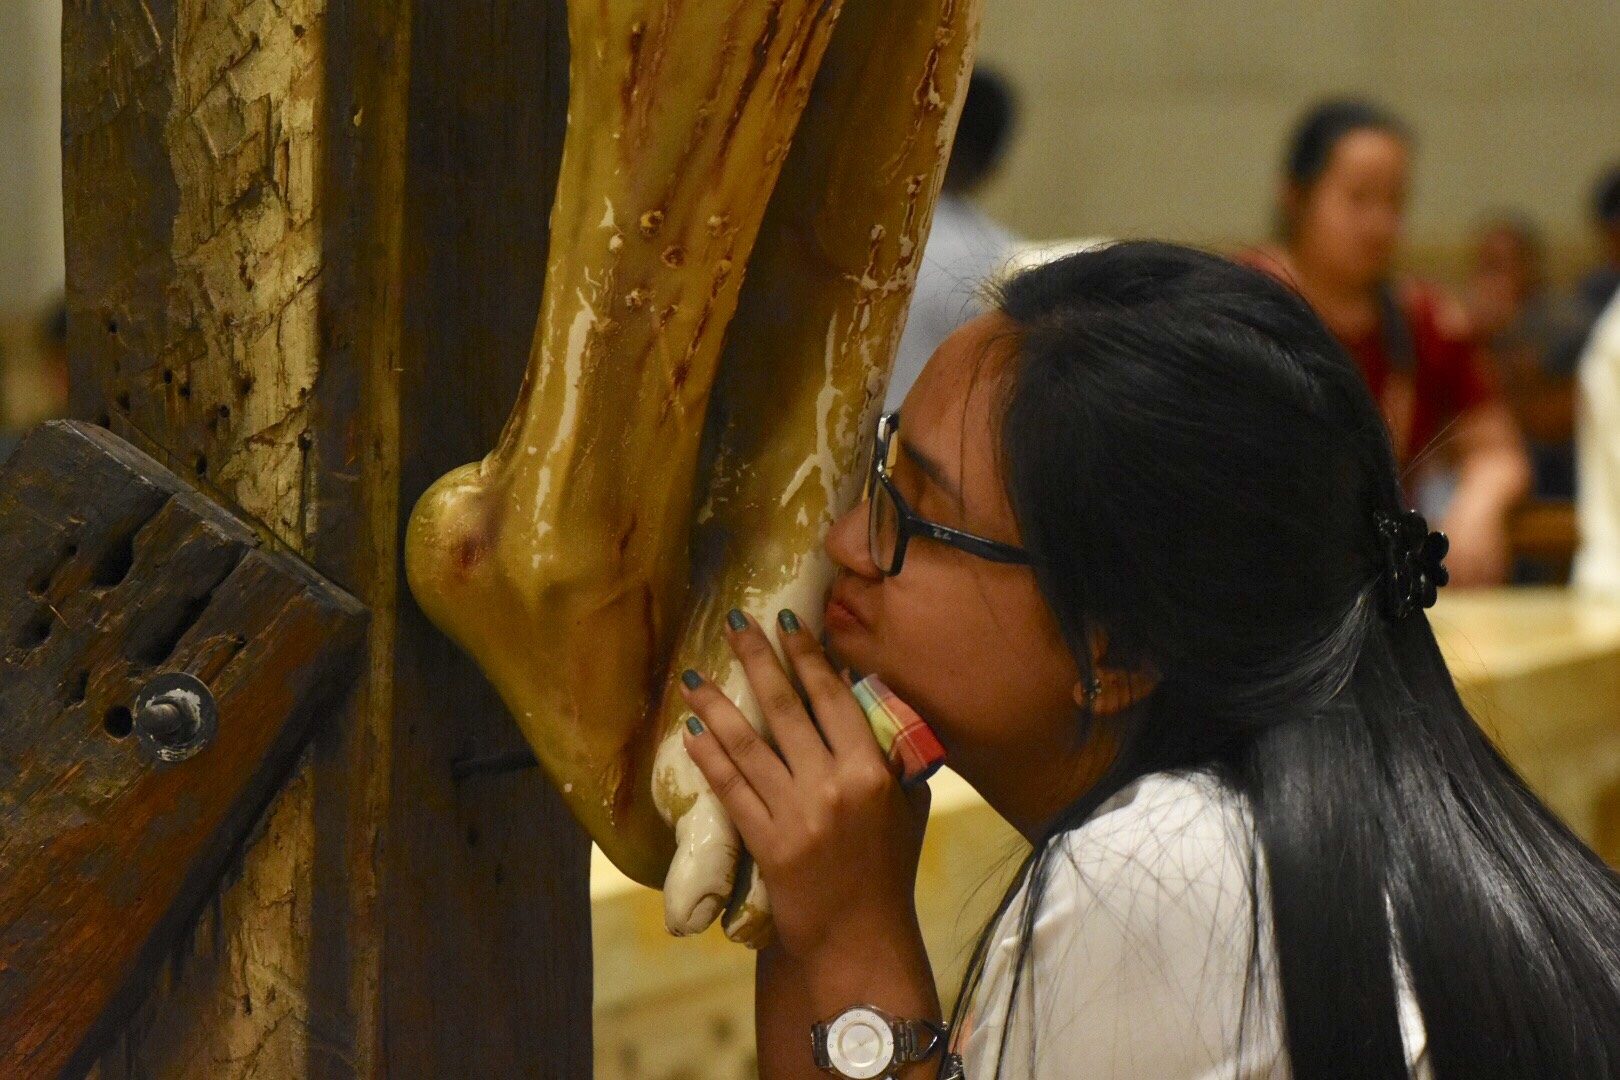 IN PHOTOS: Good Friday service at the Manila Cathedral